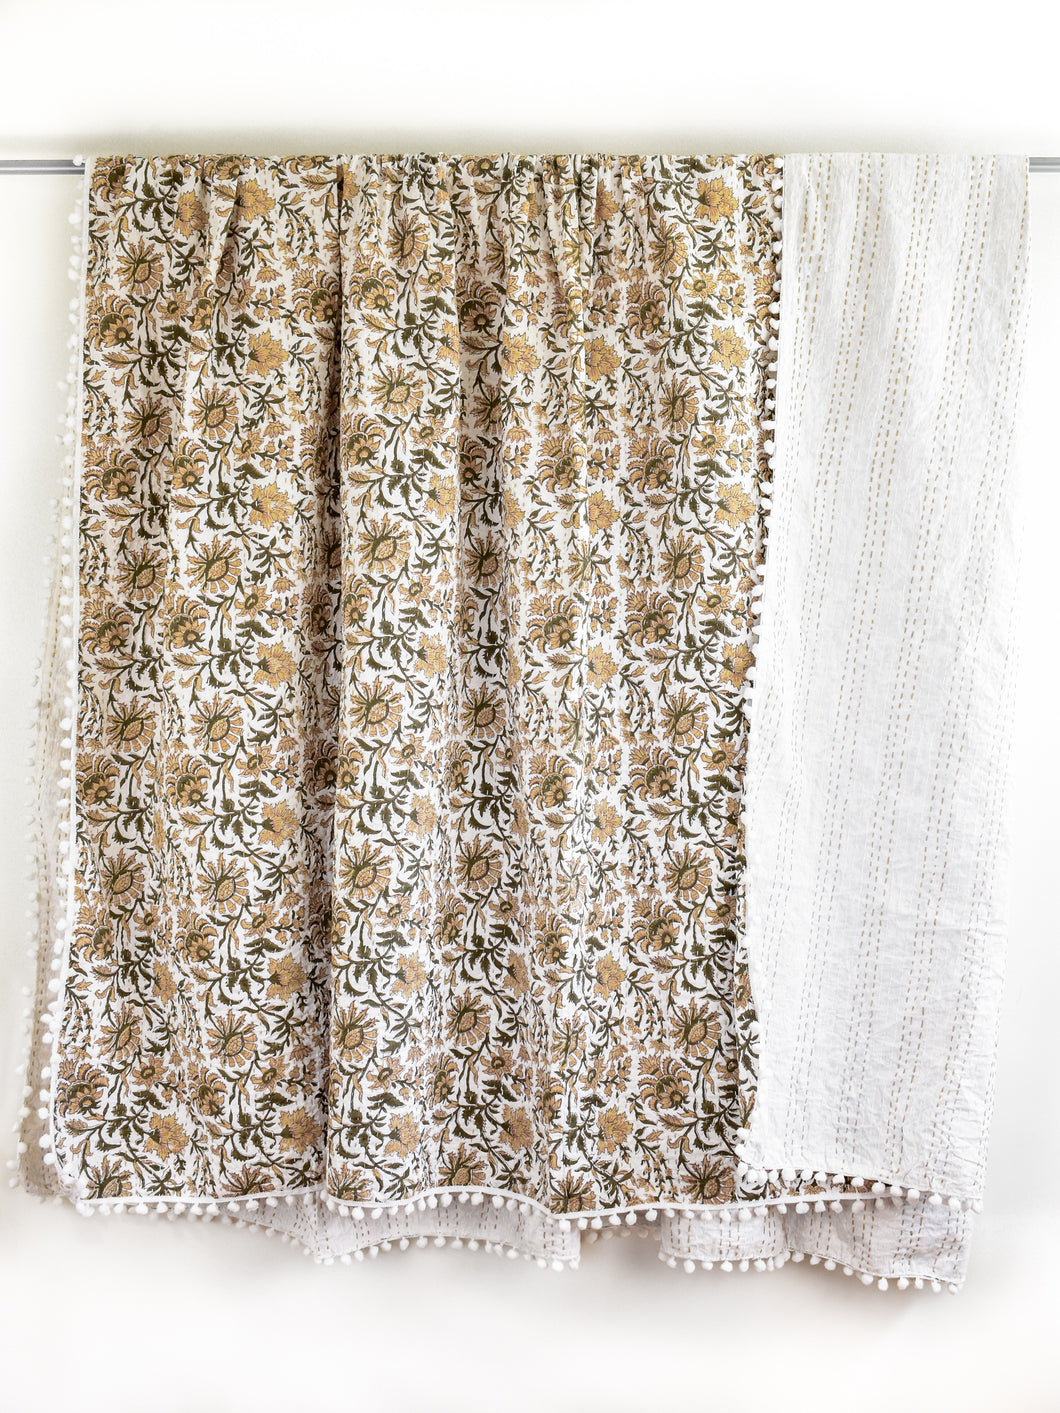 *Pre-Order* Ella Pom Pom Kantha Quilt in Olive, Tan and Faded Gold - King/Queen Sized